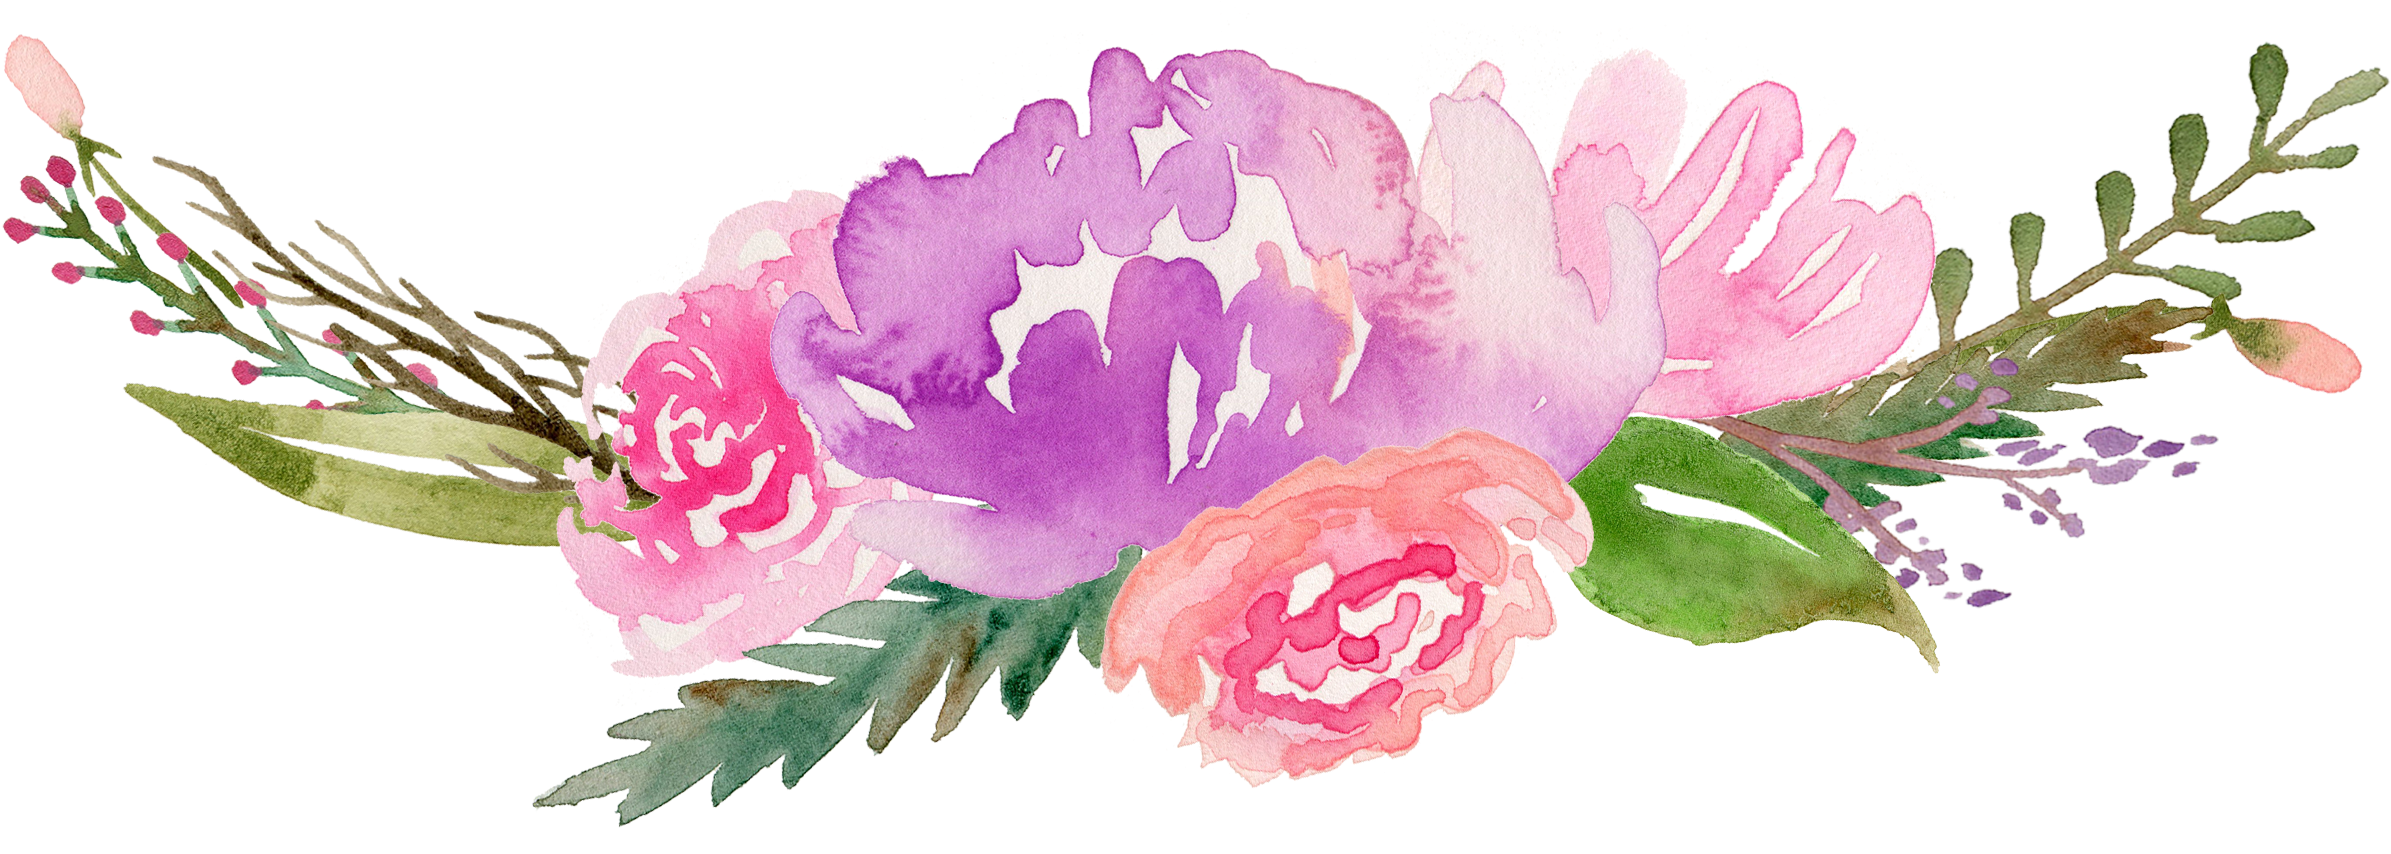 HD Royalty Free Flowers Watercolor Painting Clip Art Along.